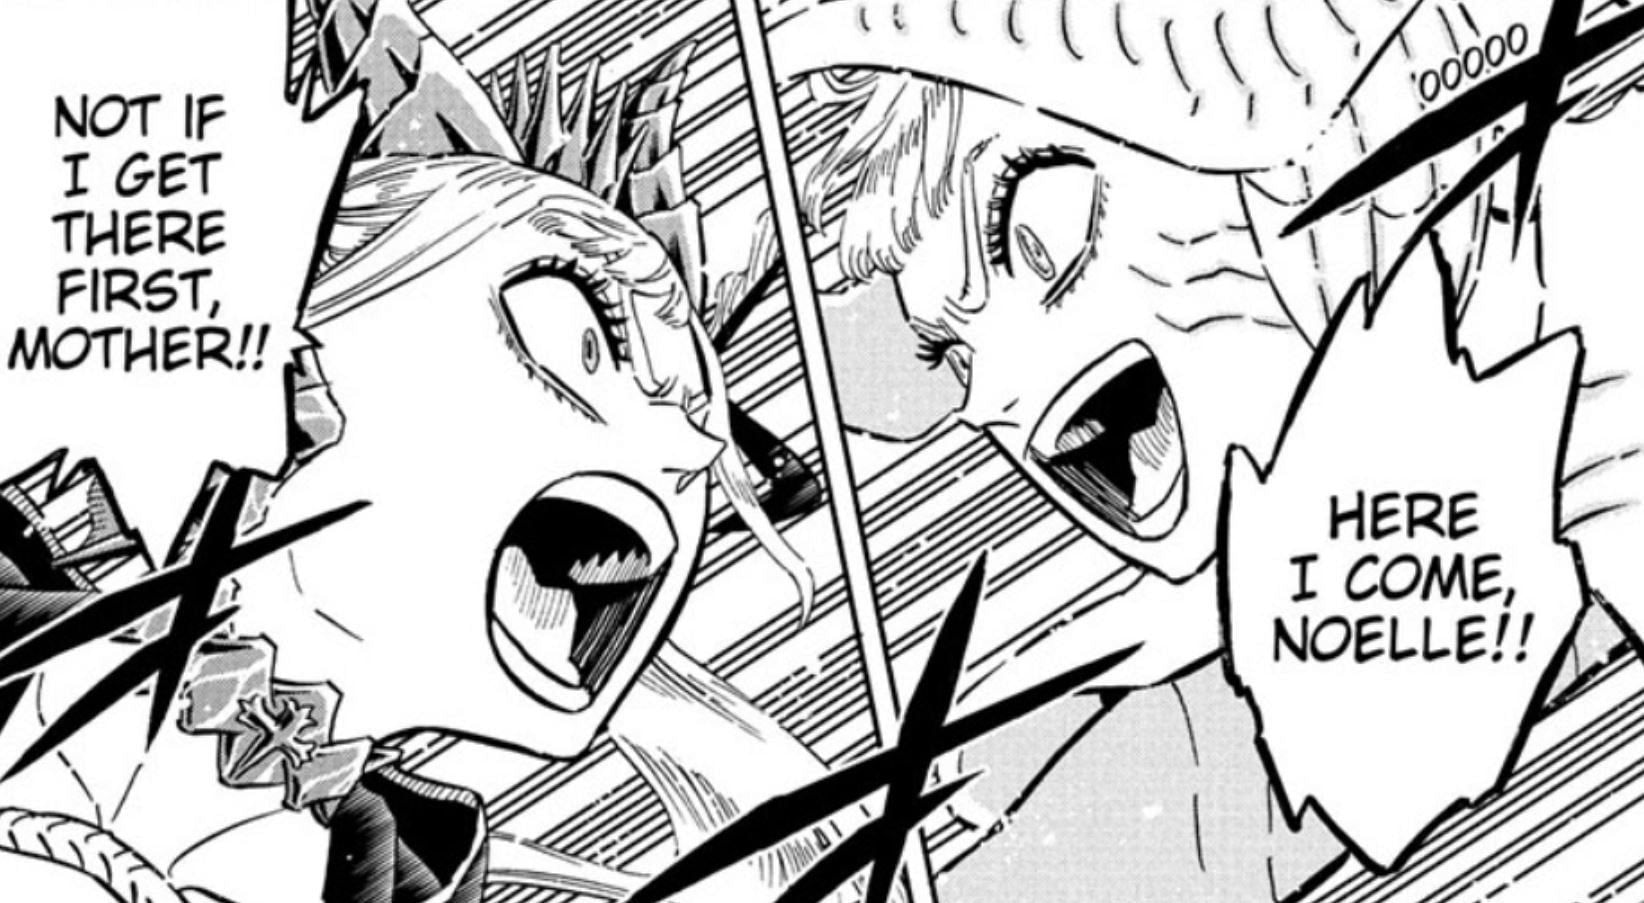 Black Clover Chapter 360 Noelle Continues To Fight Her Mother As Yuno Finally Overpowers Lucius